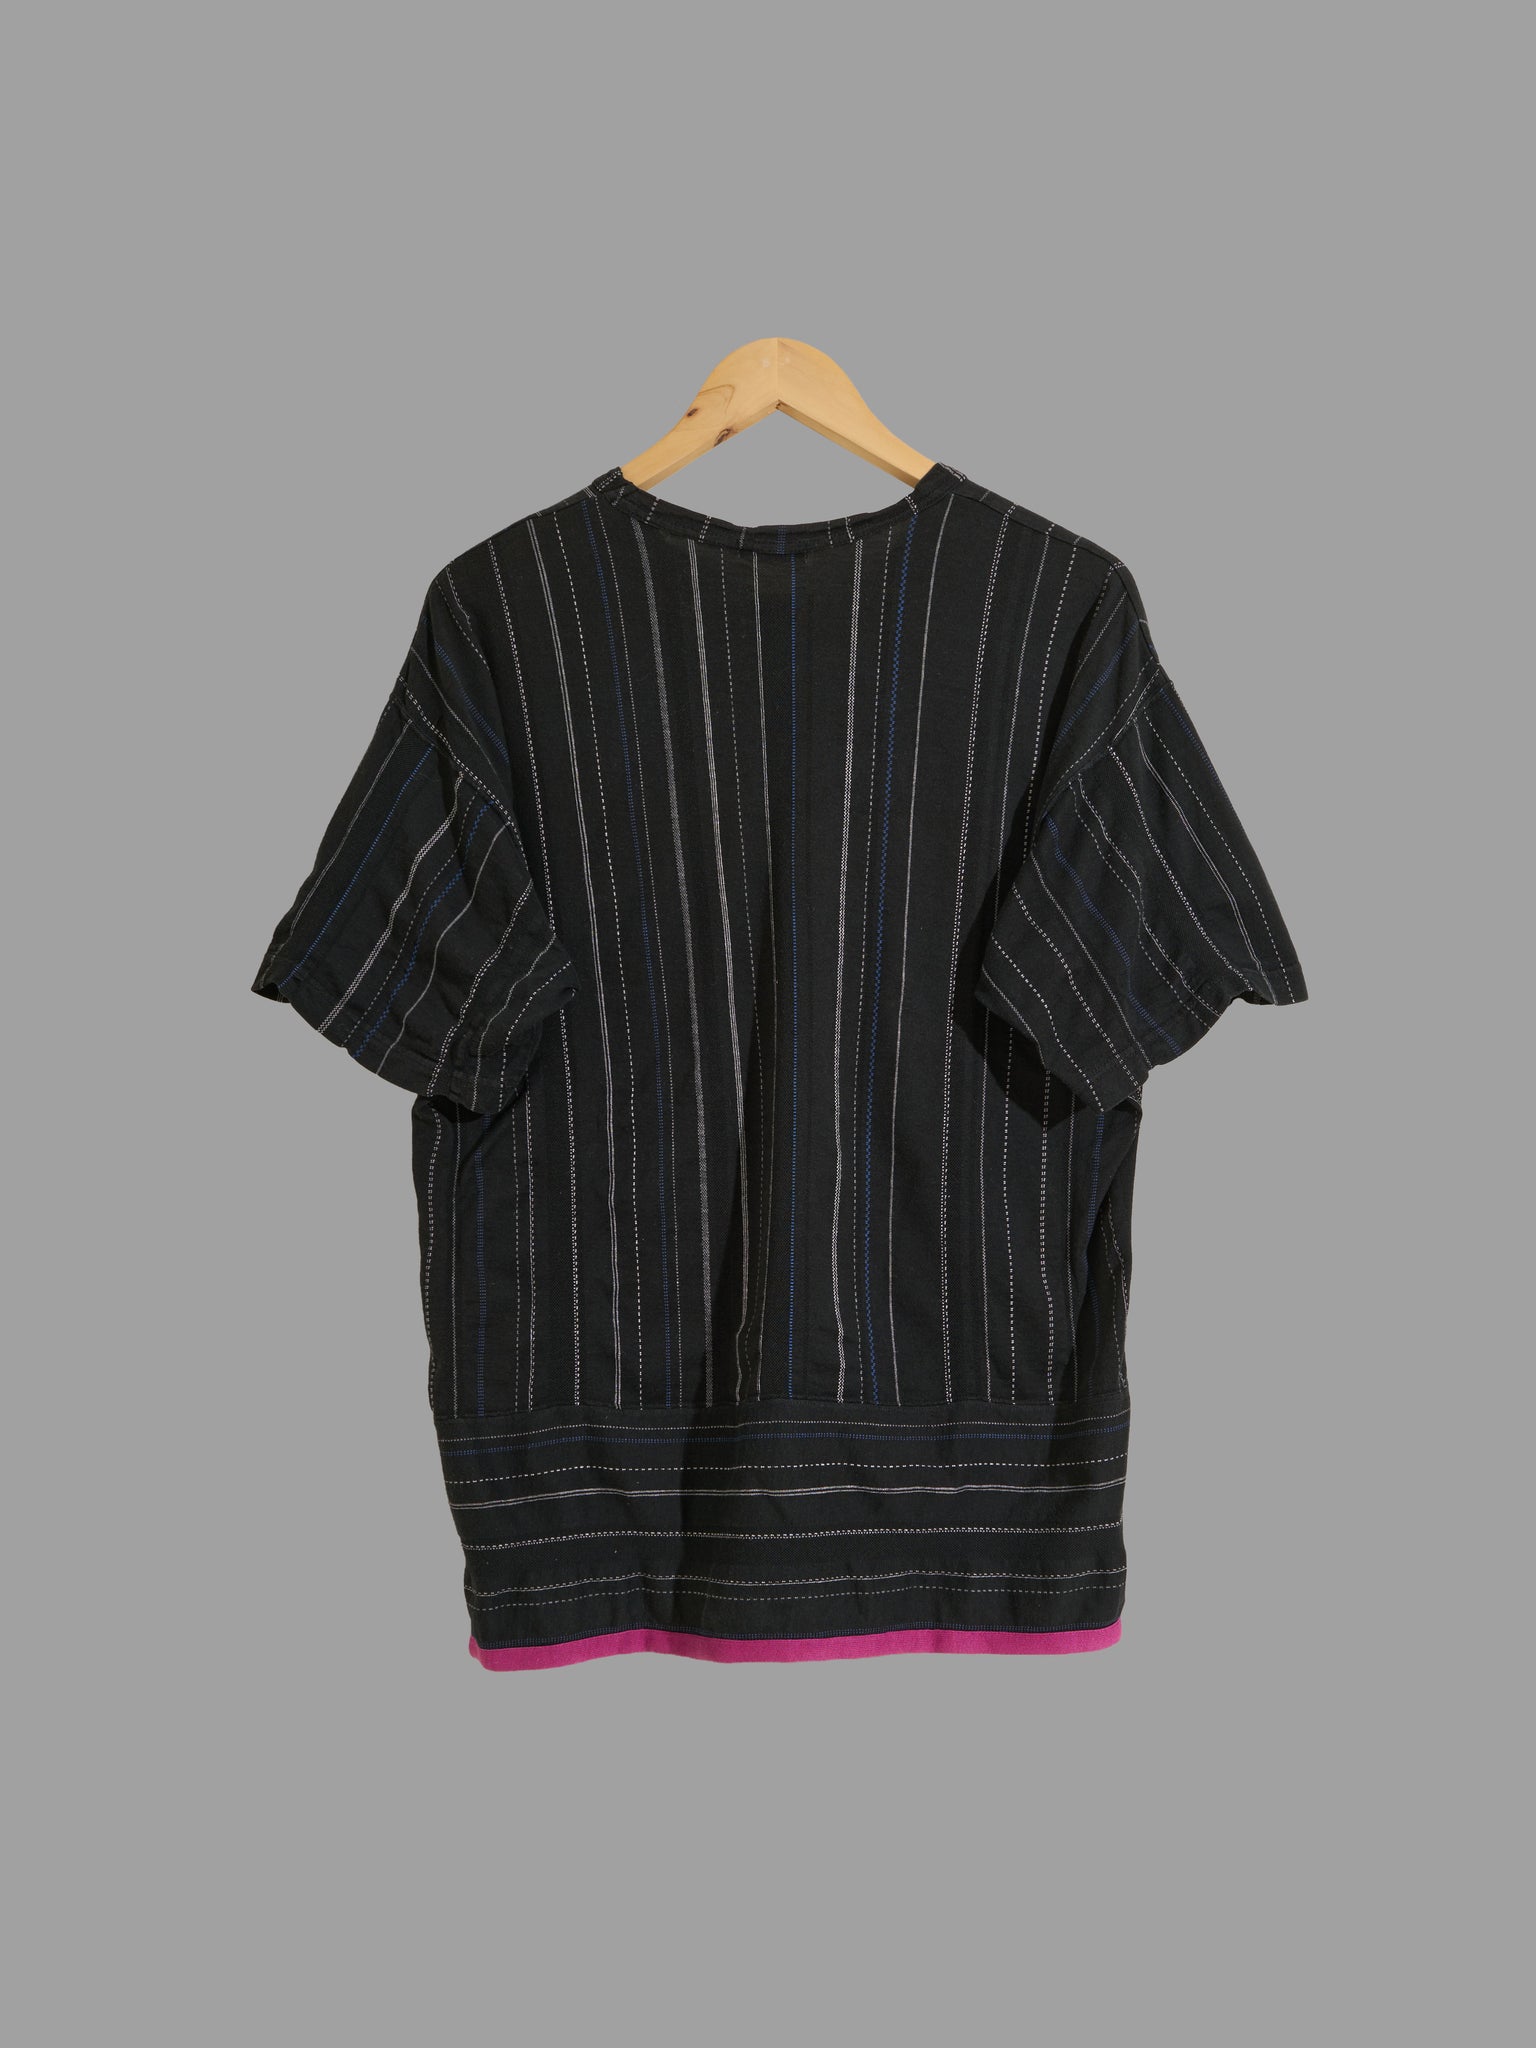 Comme des Garcons Homme black striped cotton tshirt with pink taped hem - M